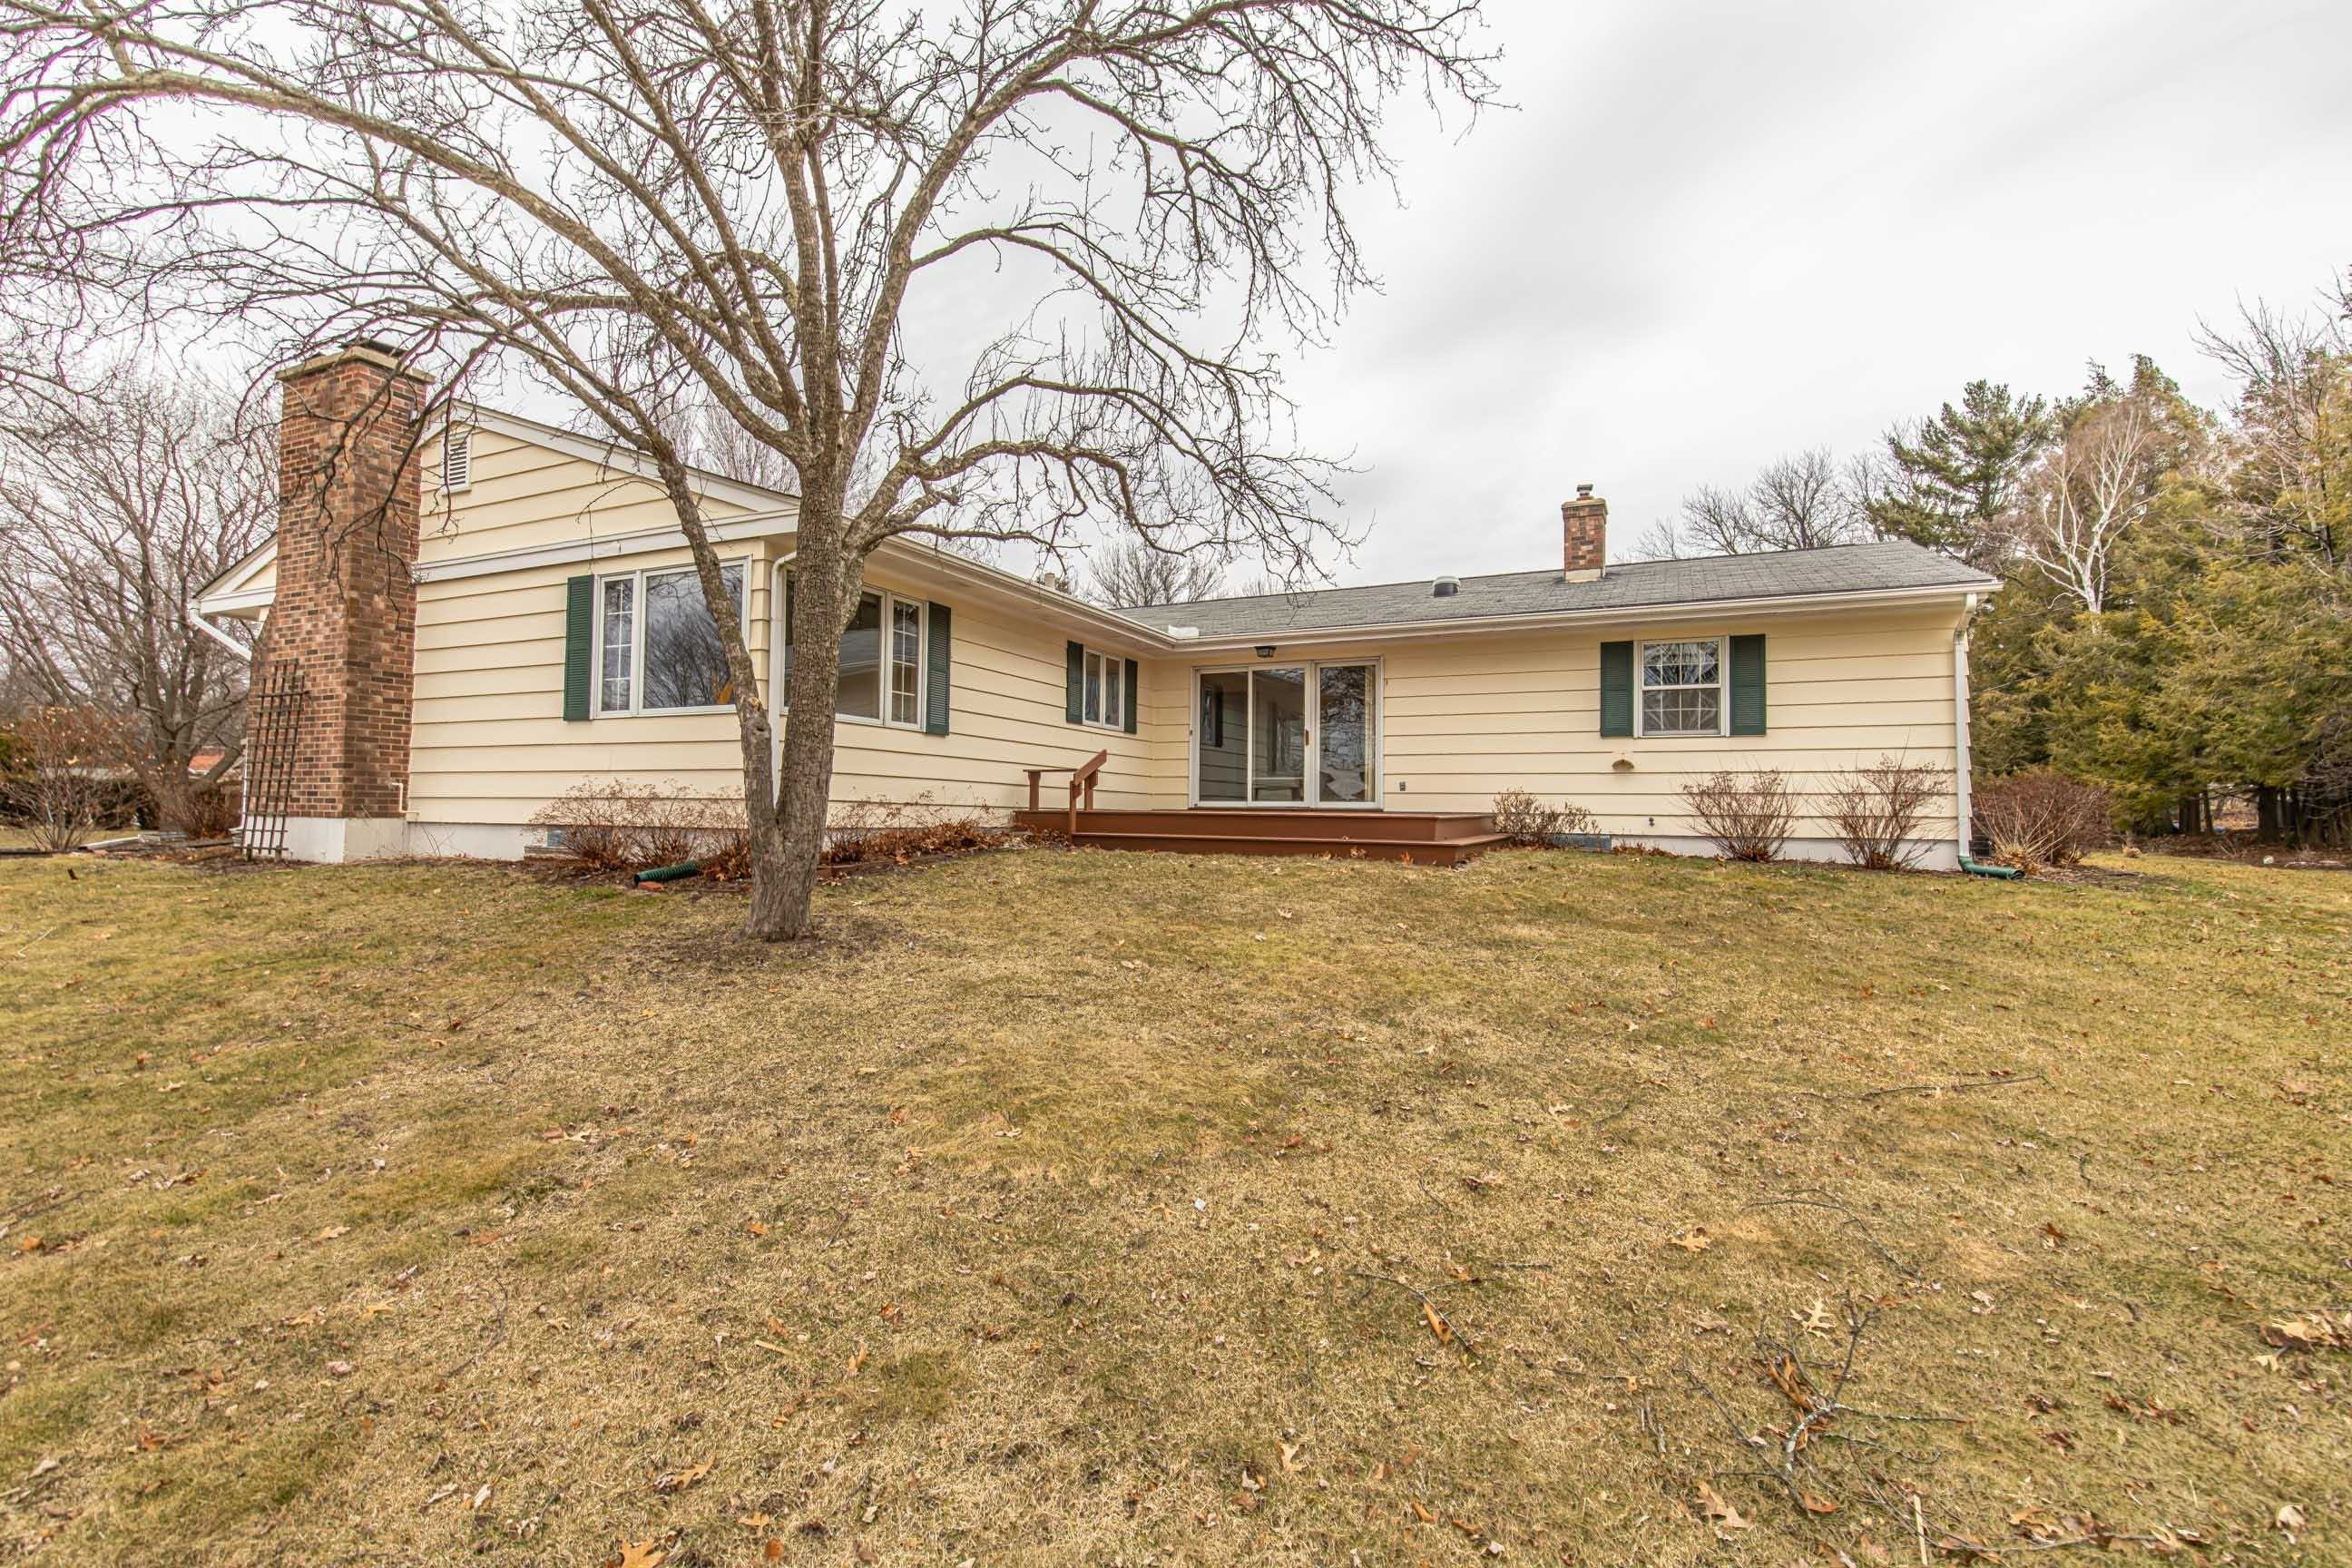 Photo -41 - 733 Dearholt Rd Madison, WI 53711